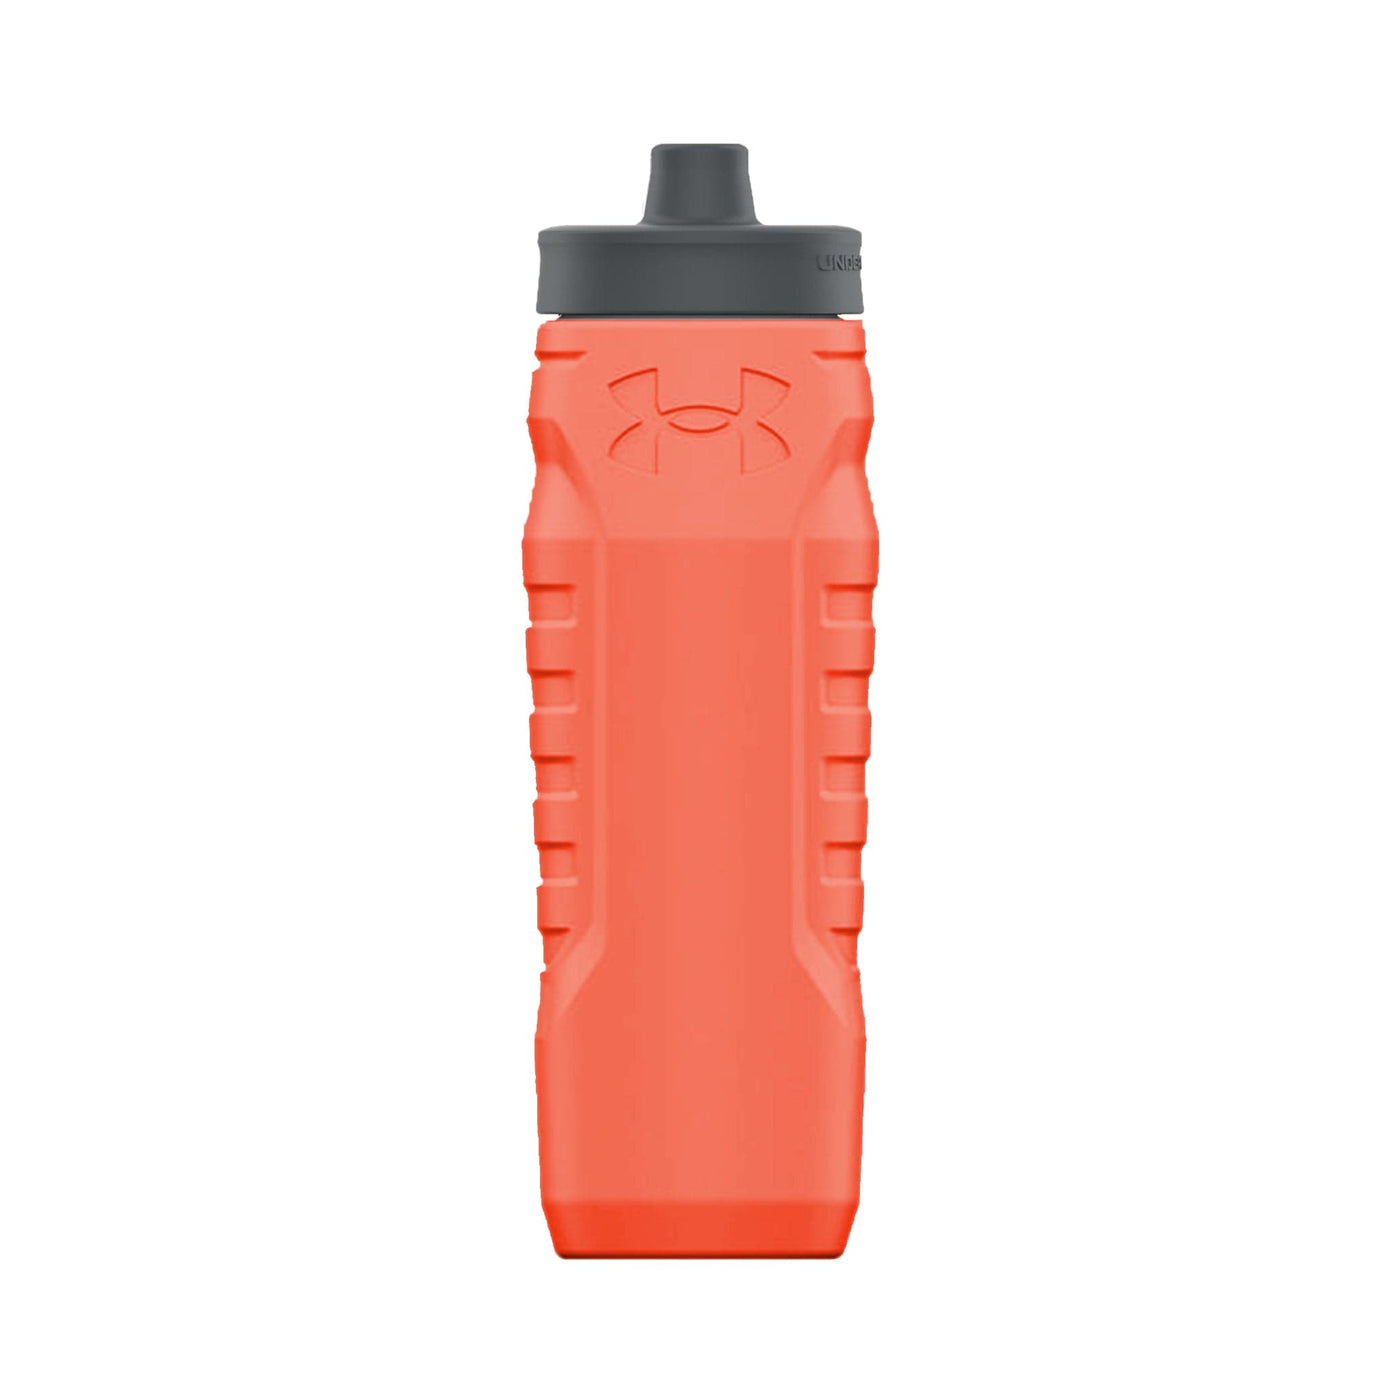 Under Armour Sideline Squeeze Bottle - White, 32 oz.